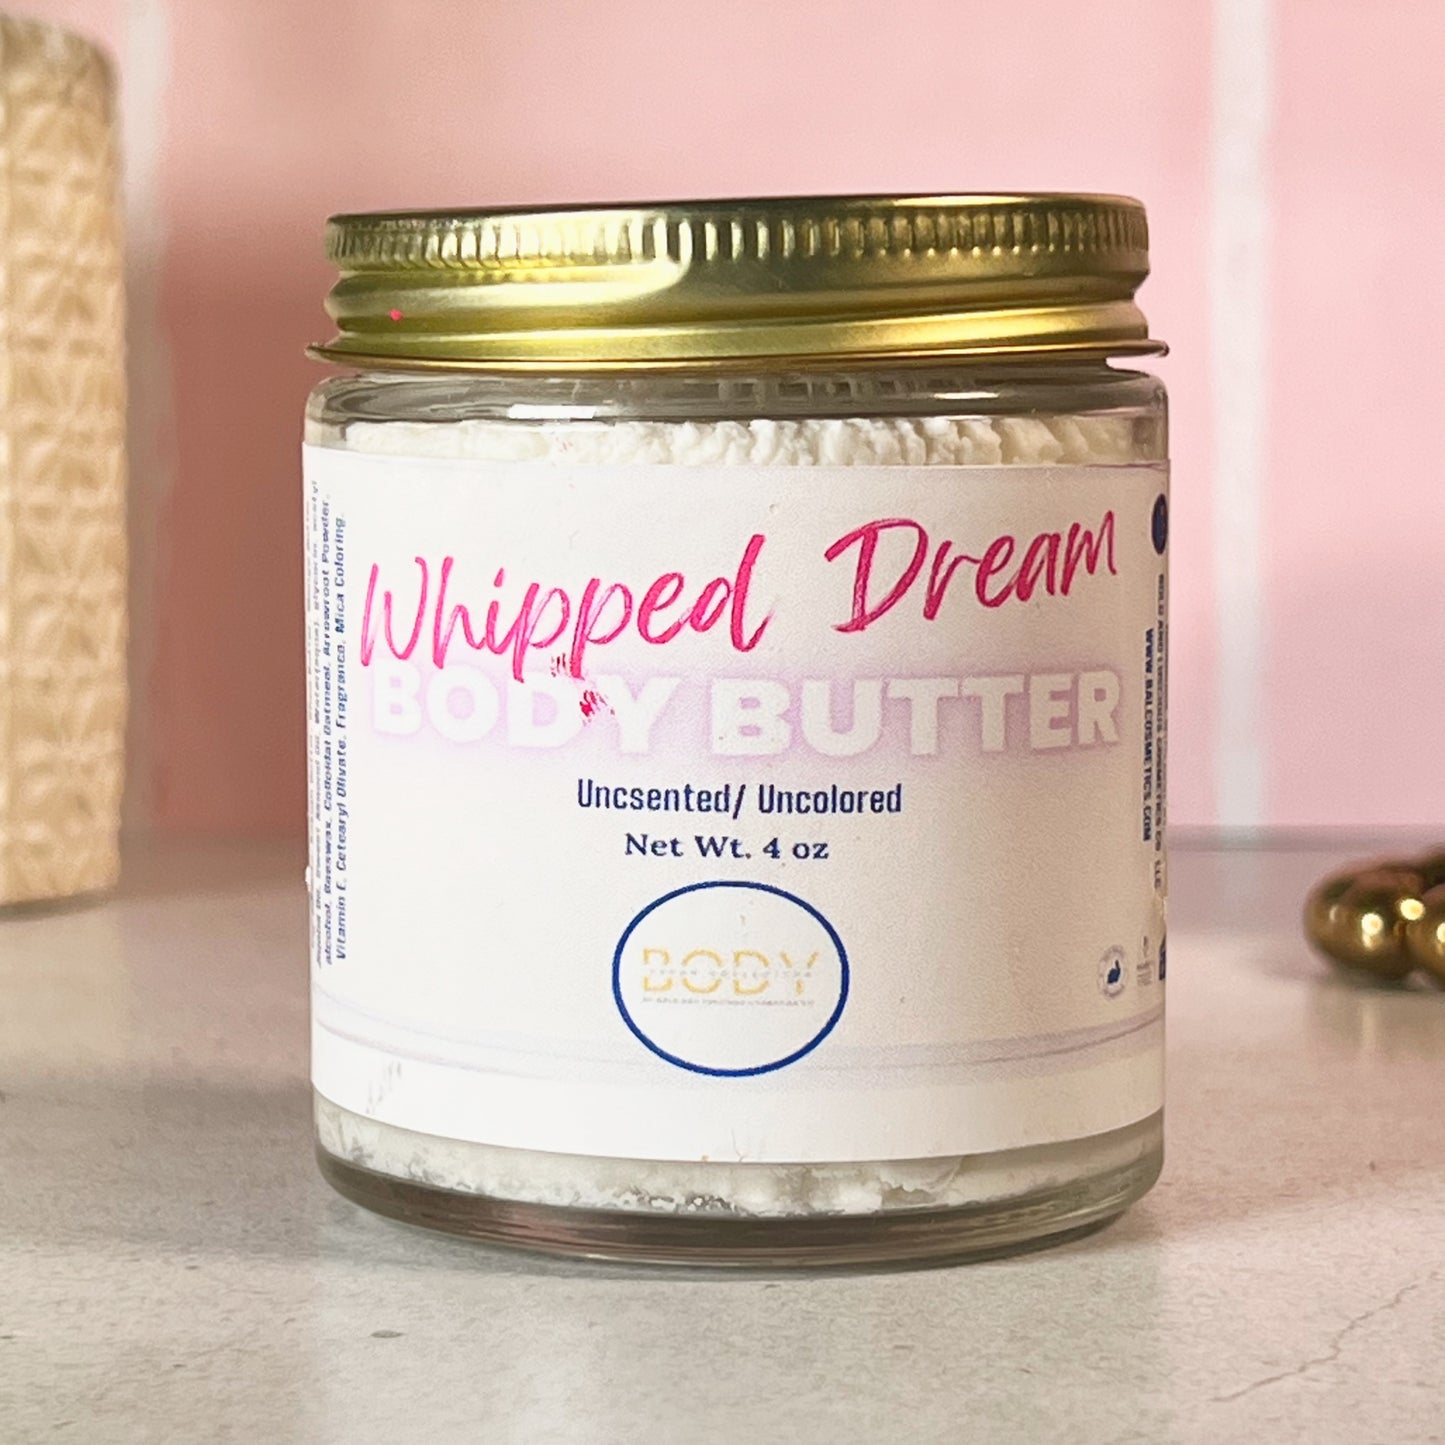 Whipped Body Butter "Get Naked" (Unscented/Uncolored)